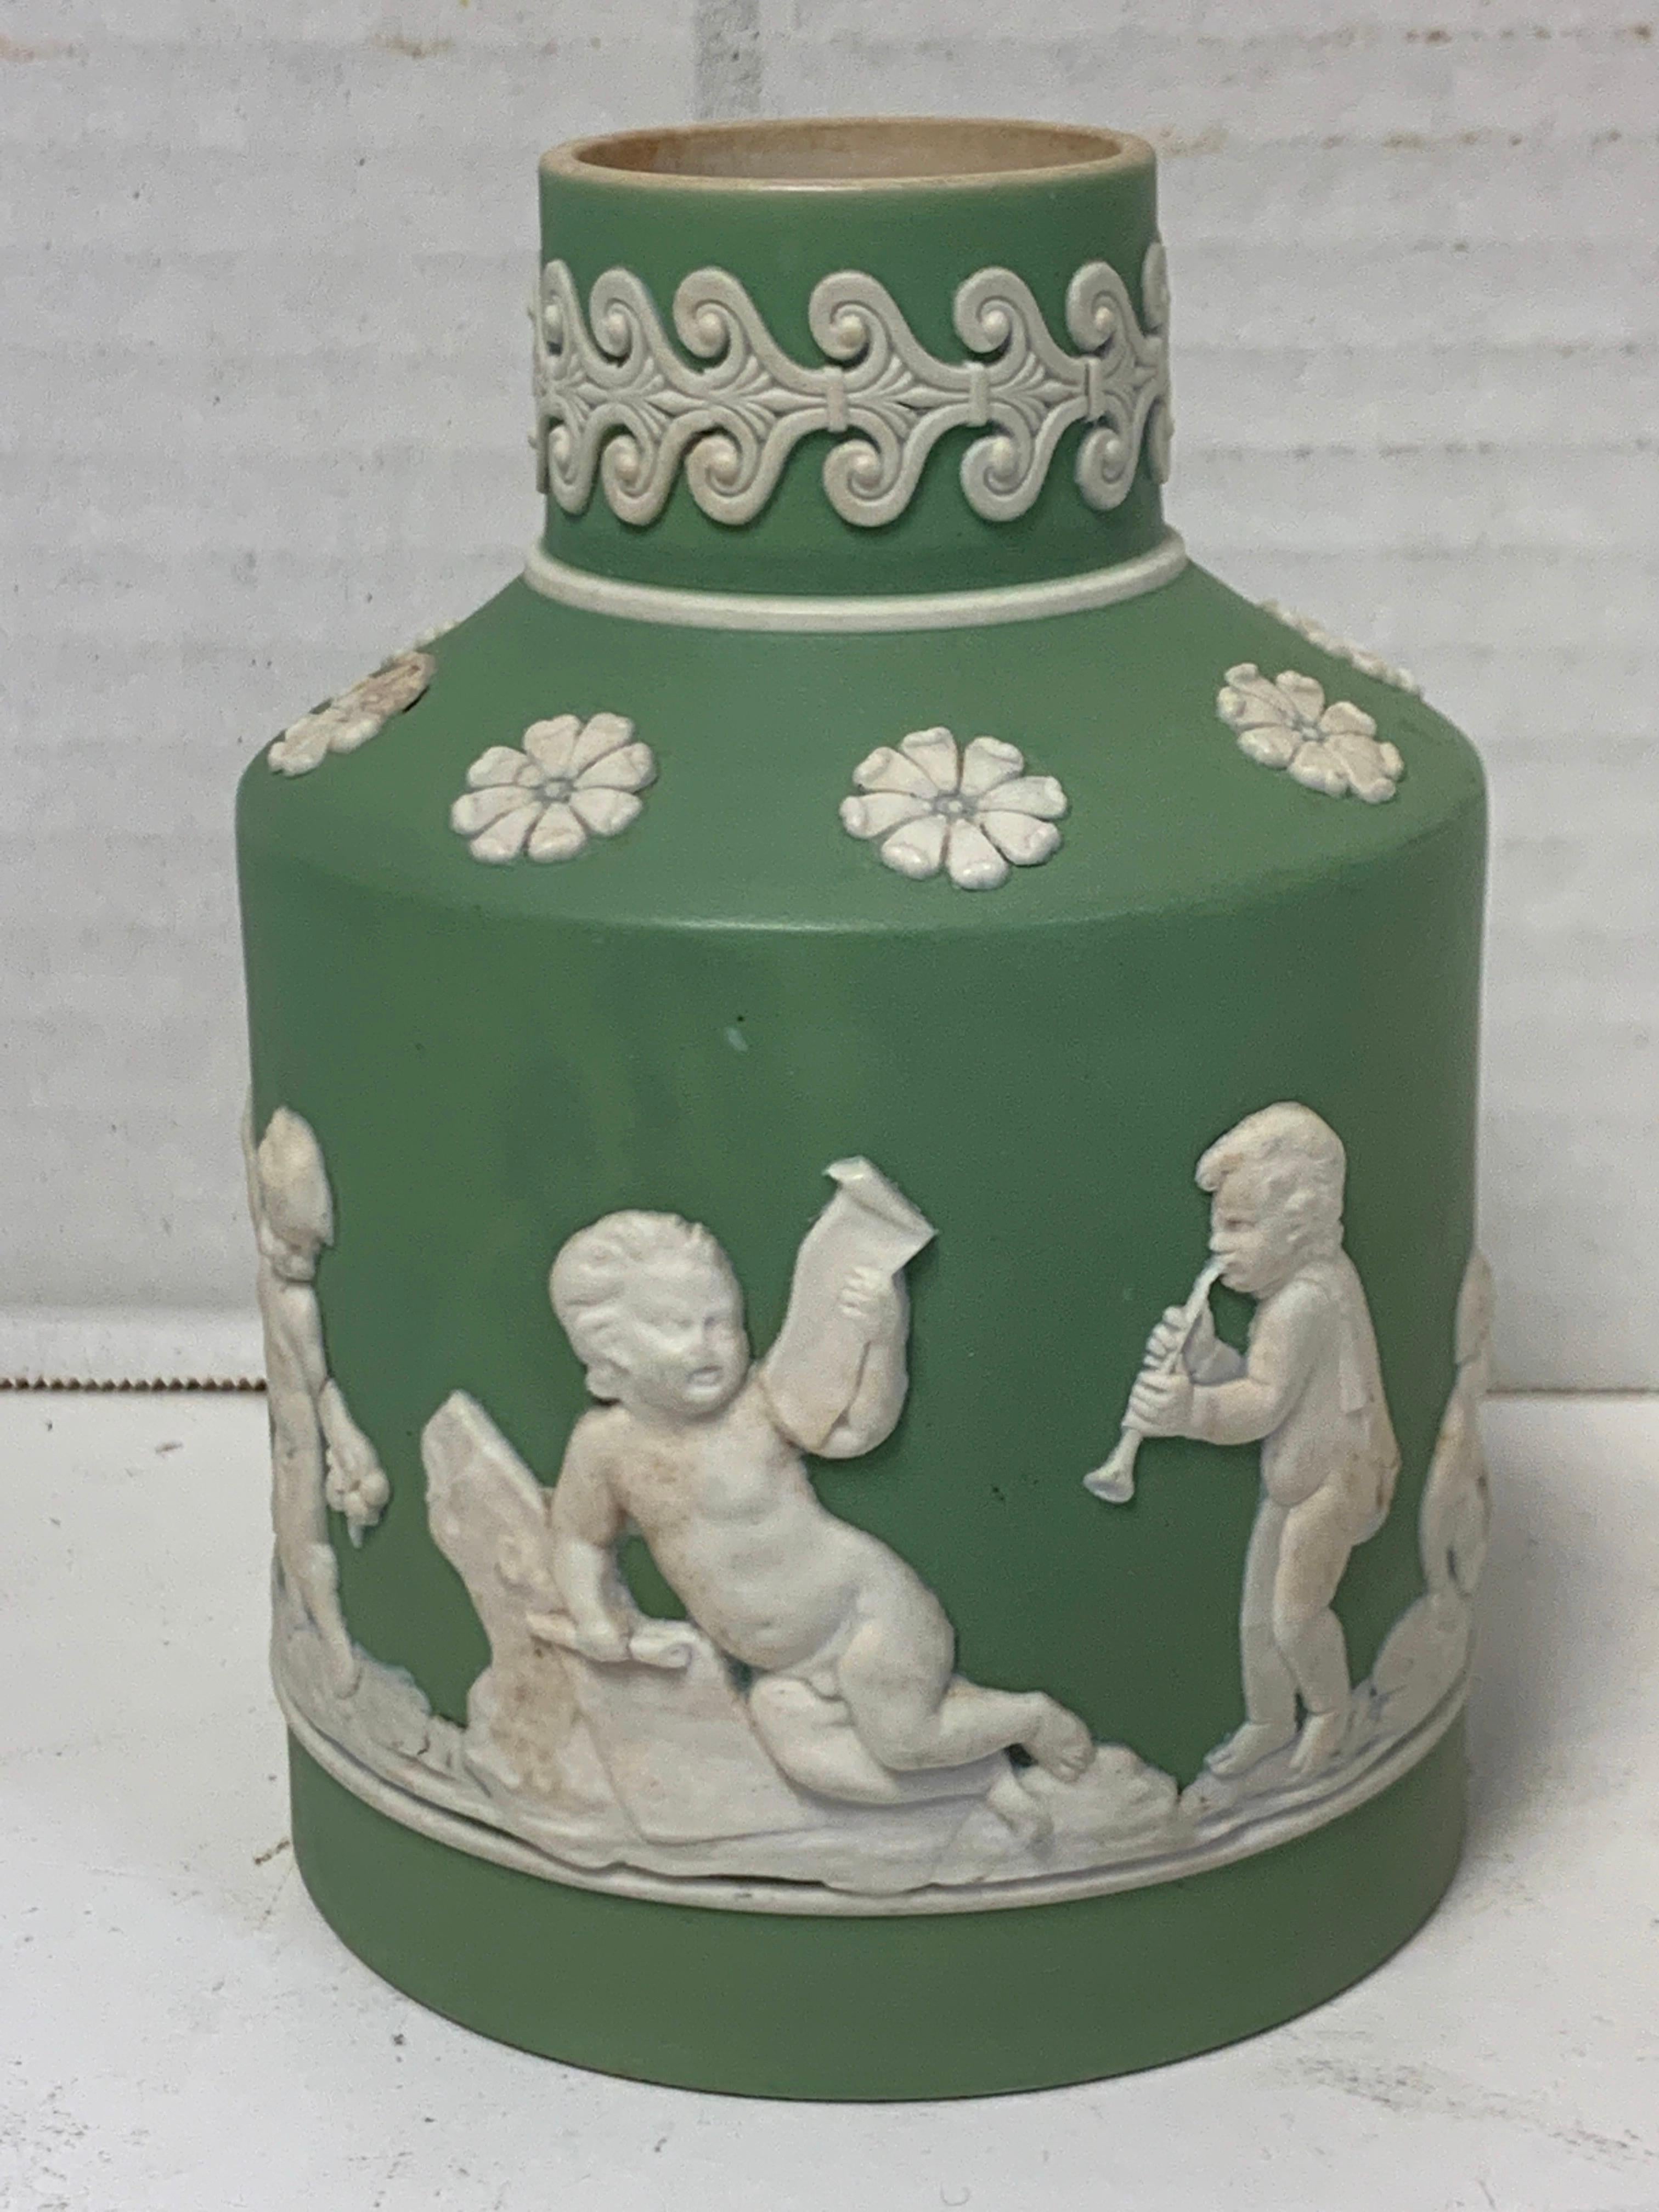 18th century Wedgwood olive jasperware tea caddy, lacking cover, an exceptional example with continuous putti decoration made between 1759-1769.